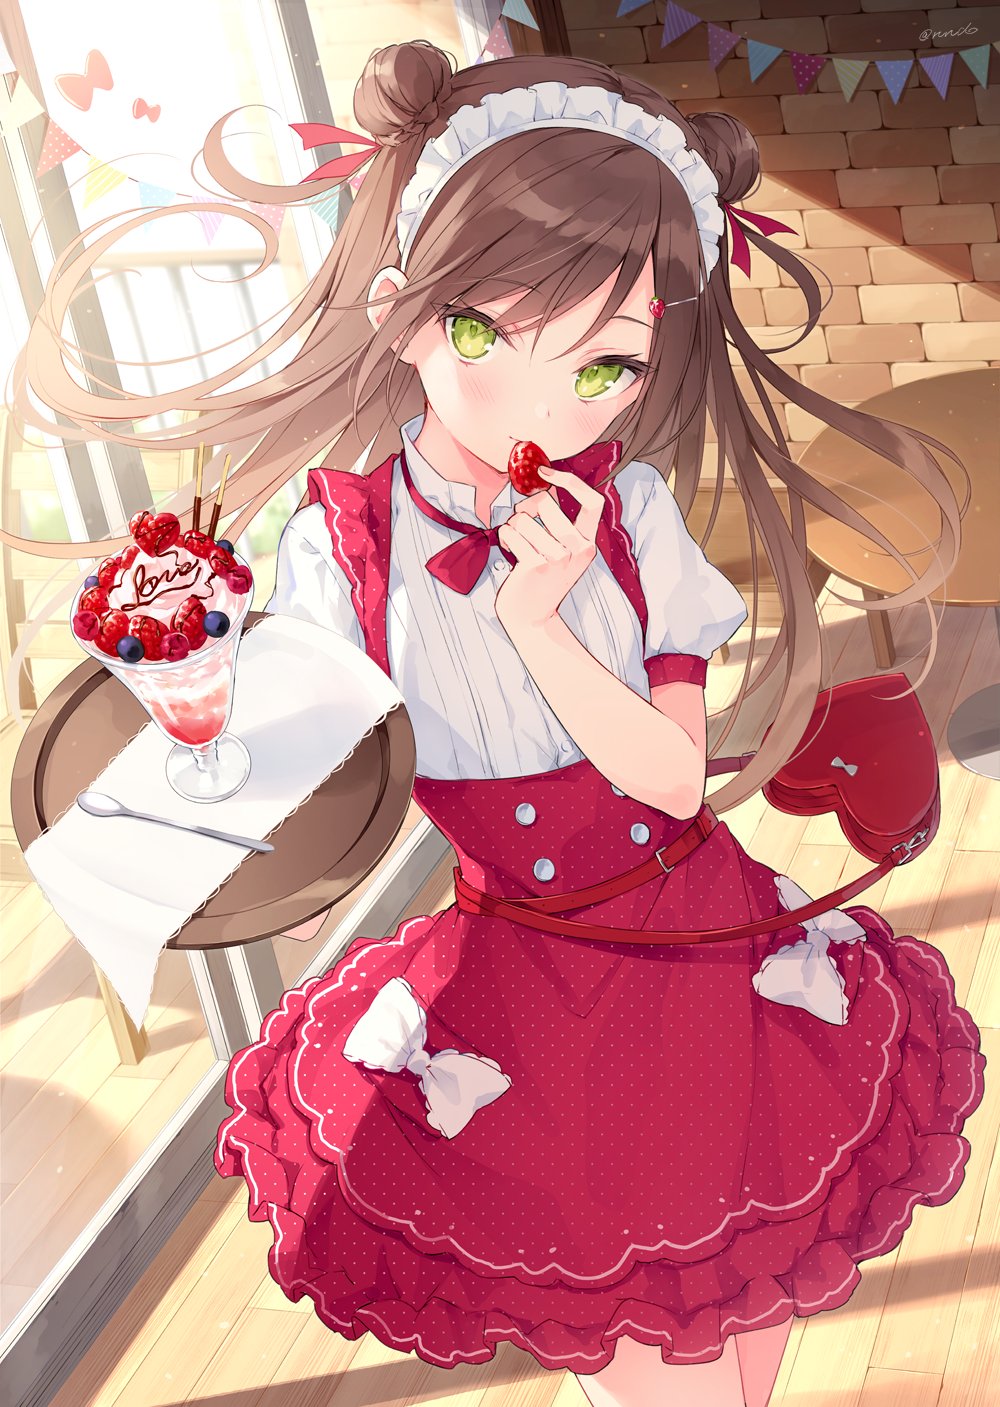 Anime 1000x1407 Rurudo anime anime girls portrait display brunette green eyes dress looking at viewer sunlight sweets tray spoon maid frills table hairbun purse heart (design) strawberries maid outfit blushing indoors women indoors fruit blueberries